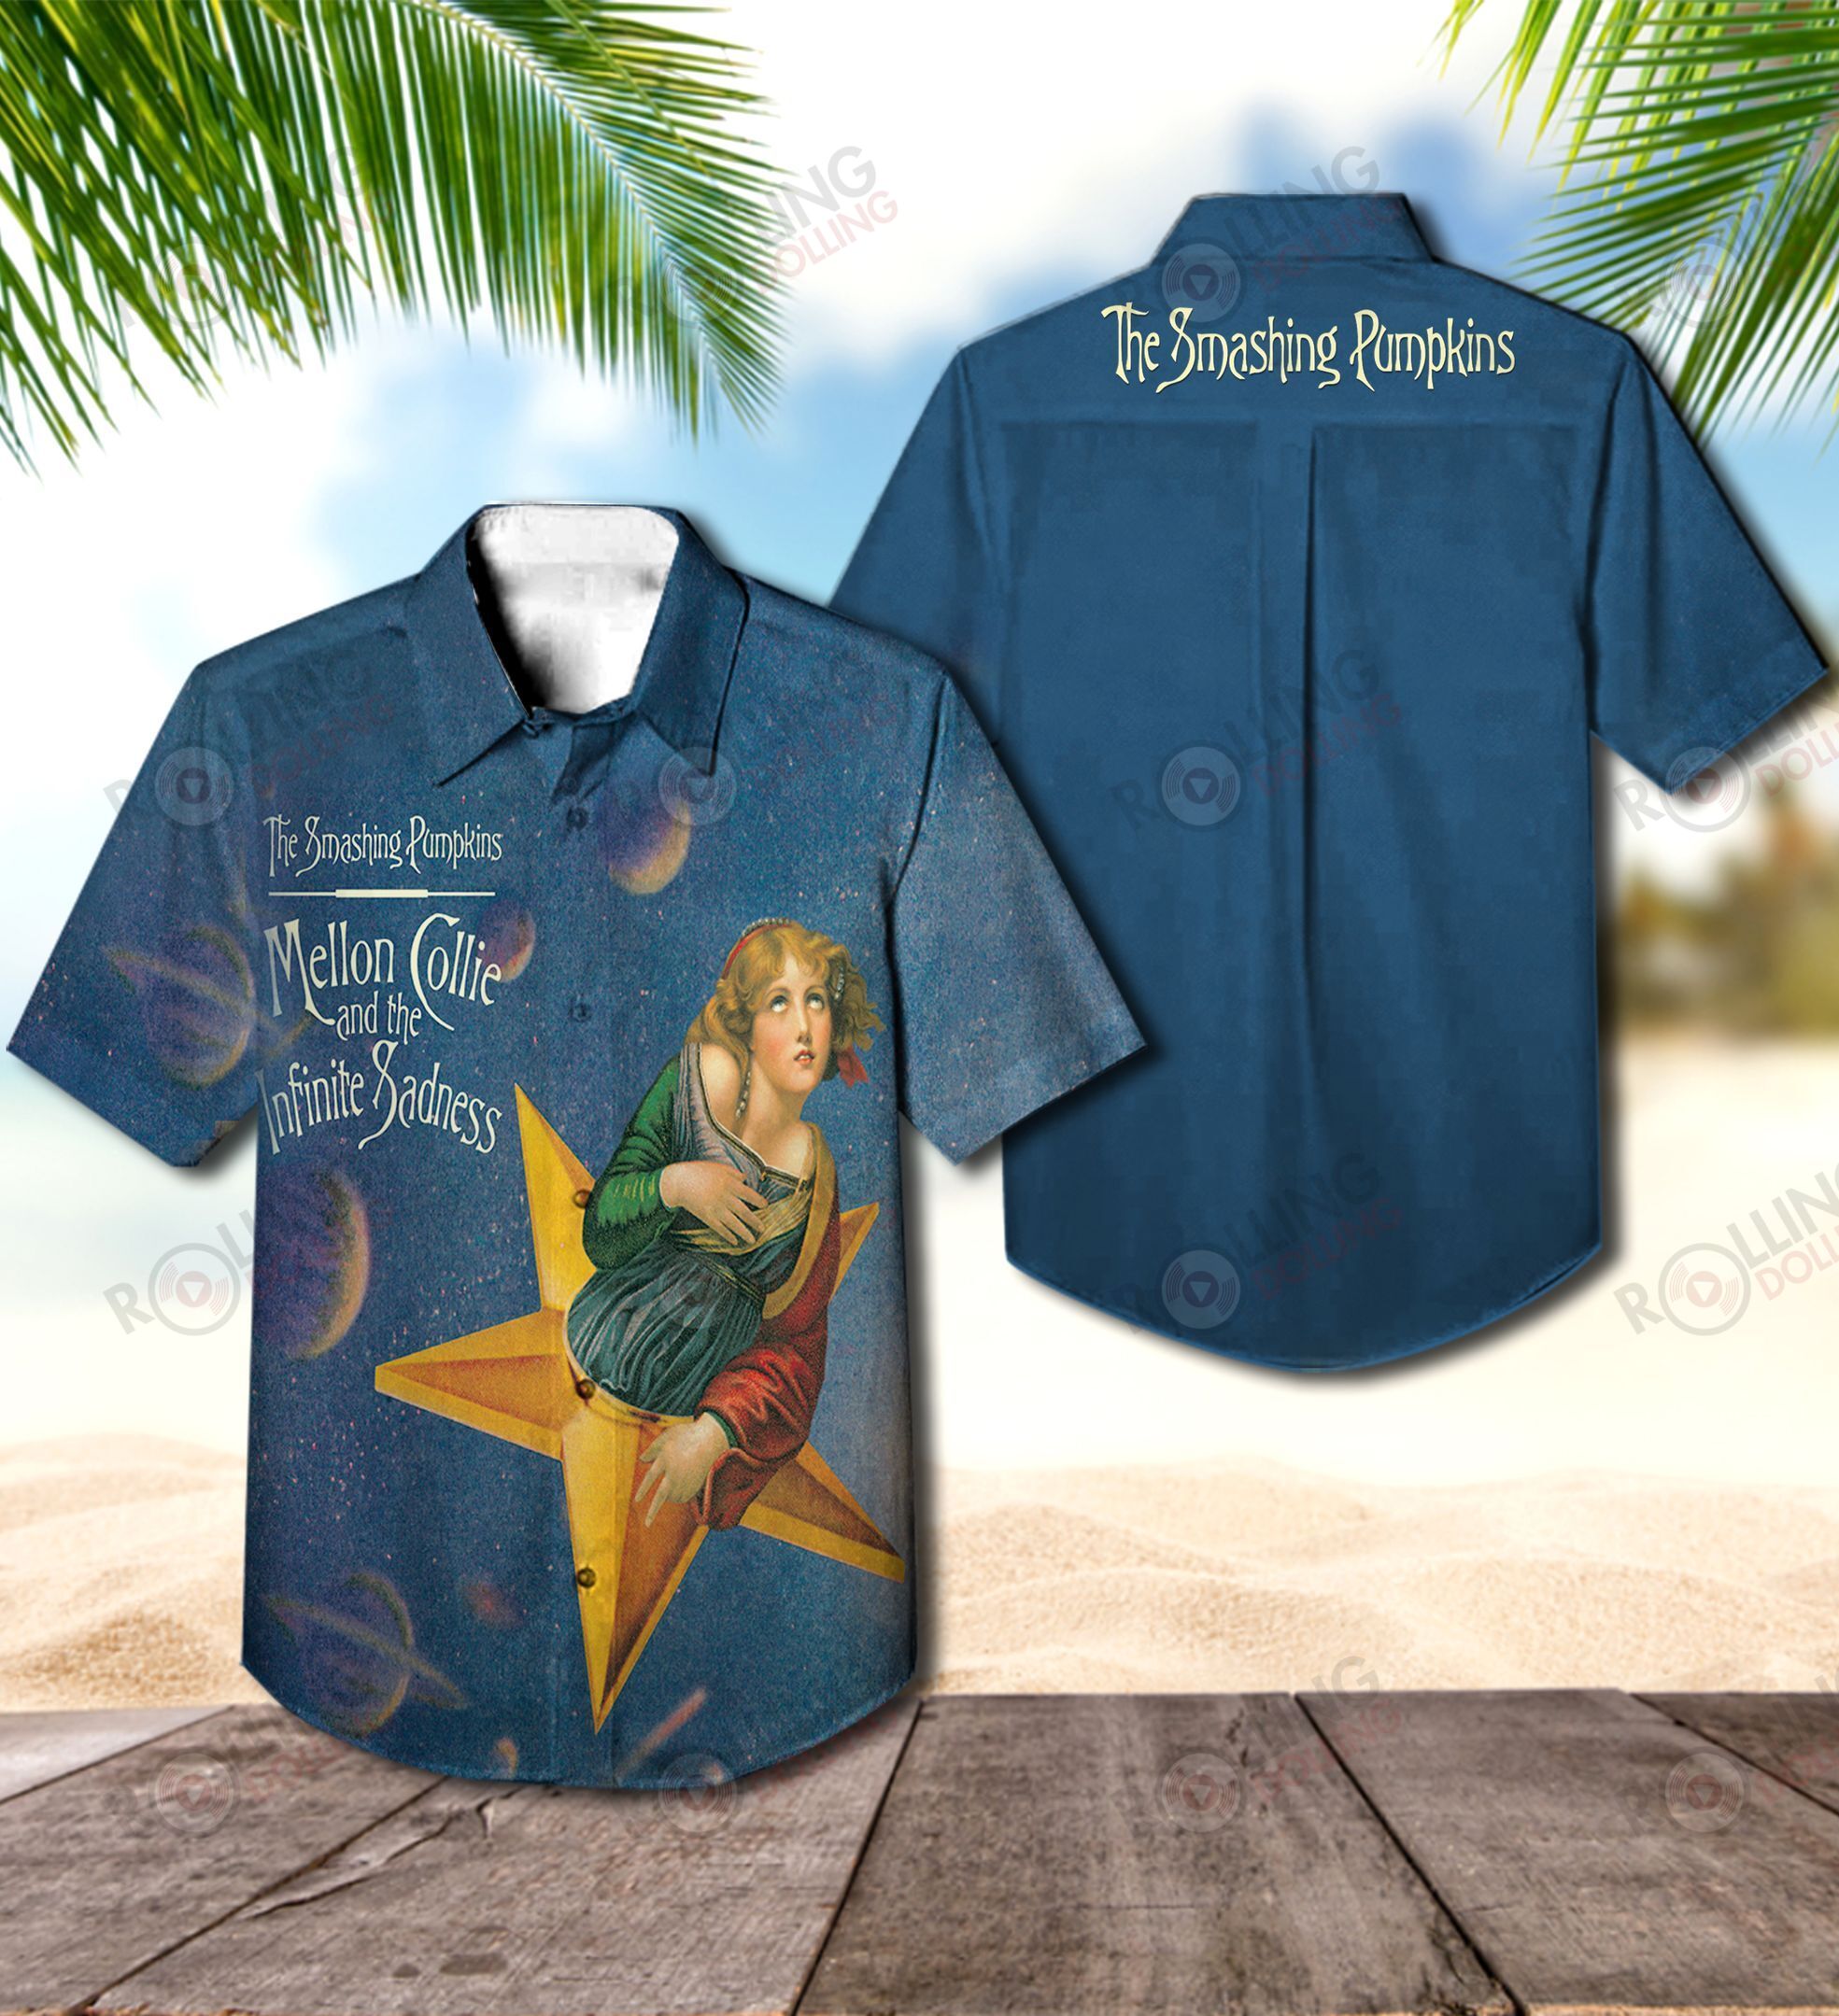 This would make a great gift for any fan who loves Hawaiian Shirt as well as Rock band 120